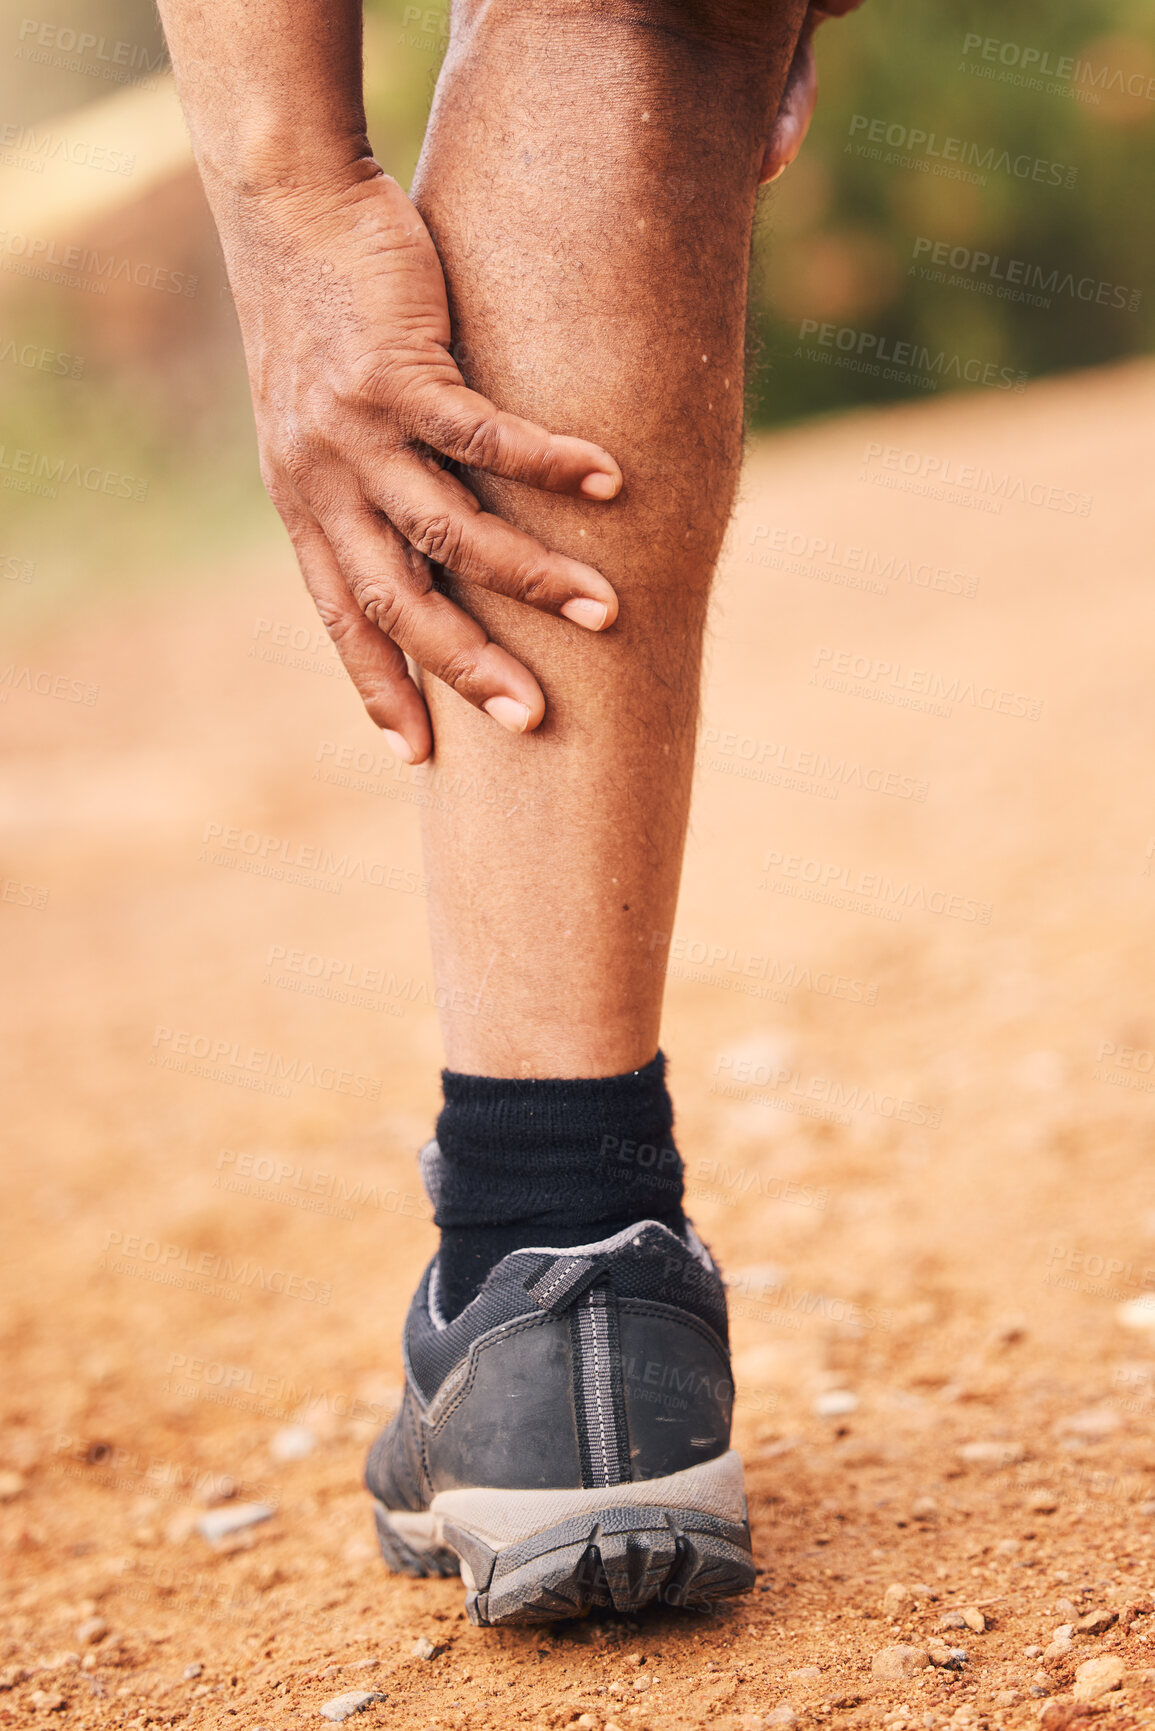 Buy stock photo Leg pain, injury and hands of senior black man after hiking accident outdoors. Sports, training hike or elderly male with fibromyalgia, legs inflammation or arthritis, broken bones or painful muscles